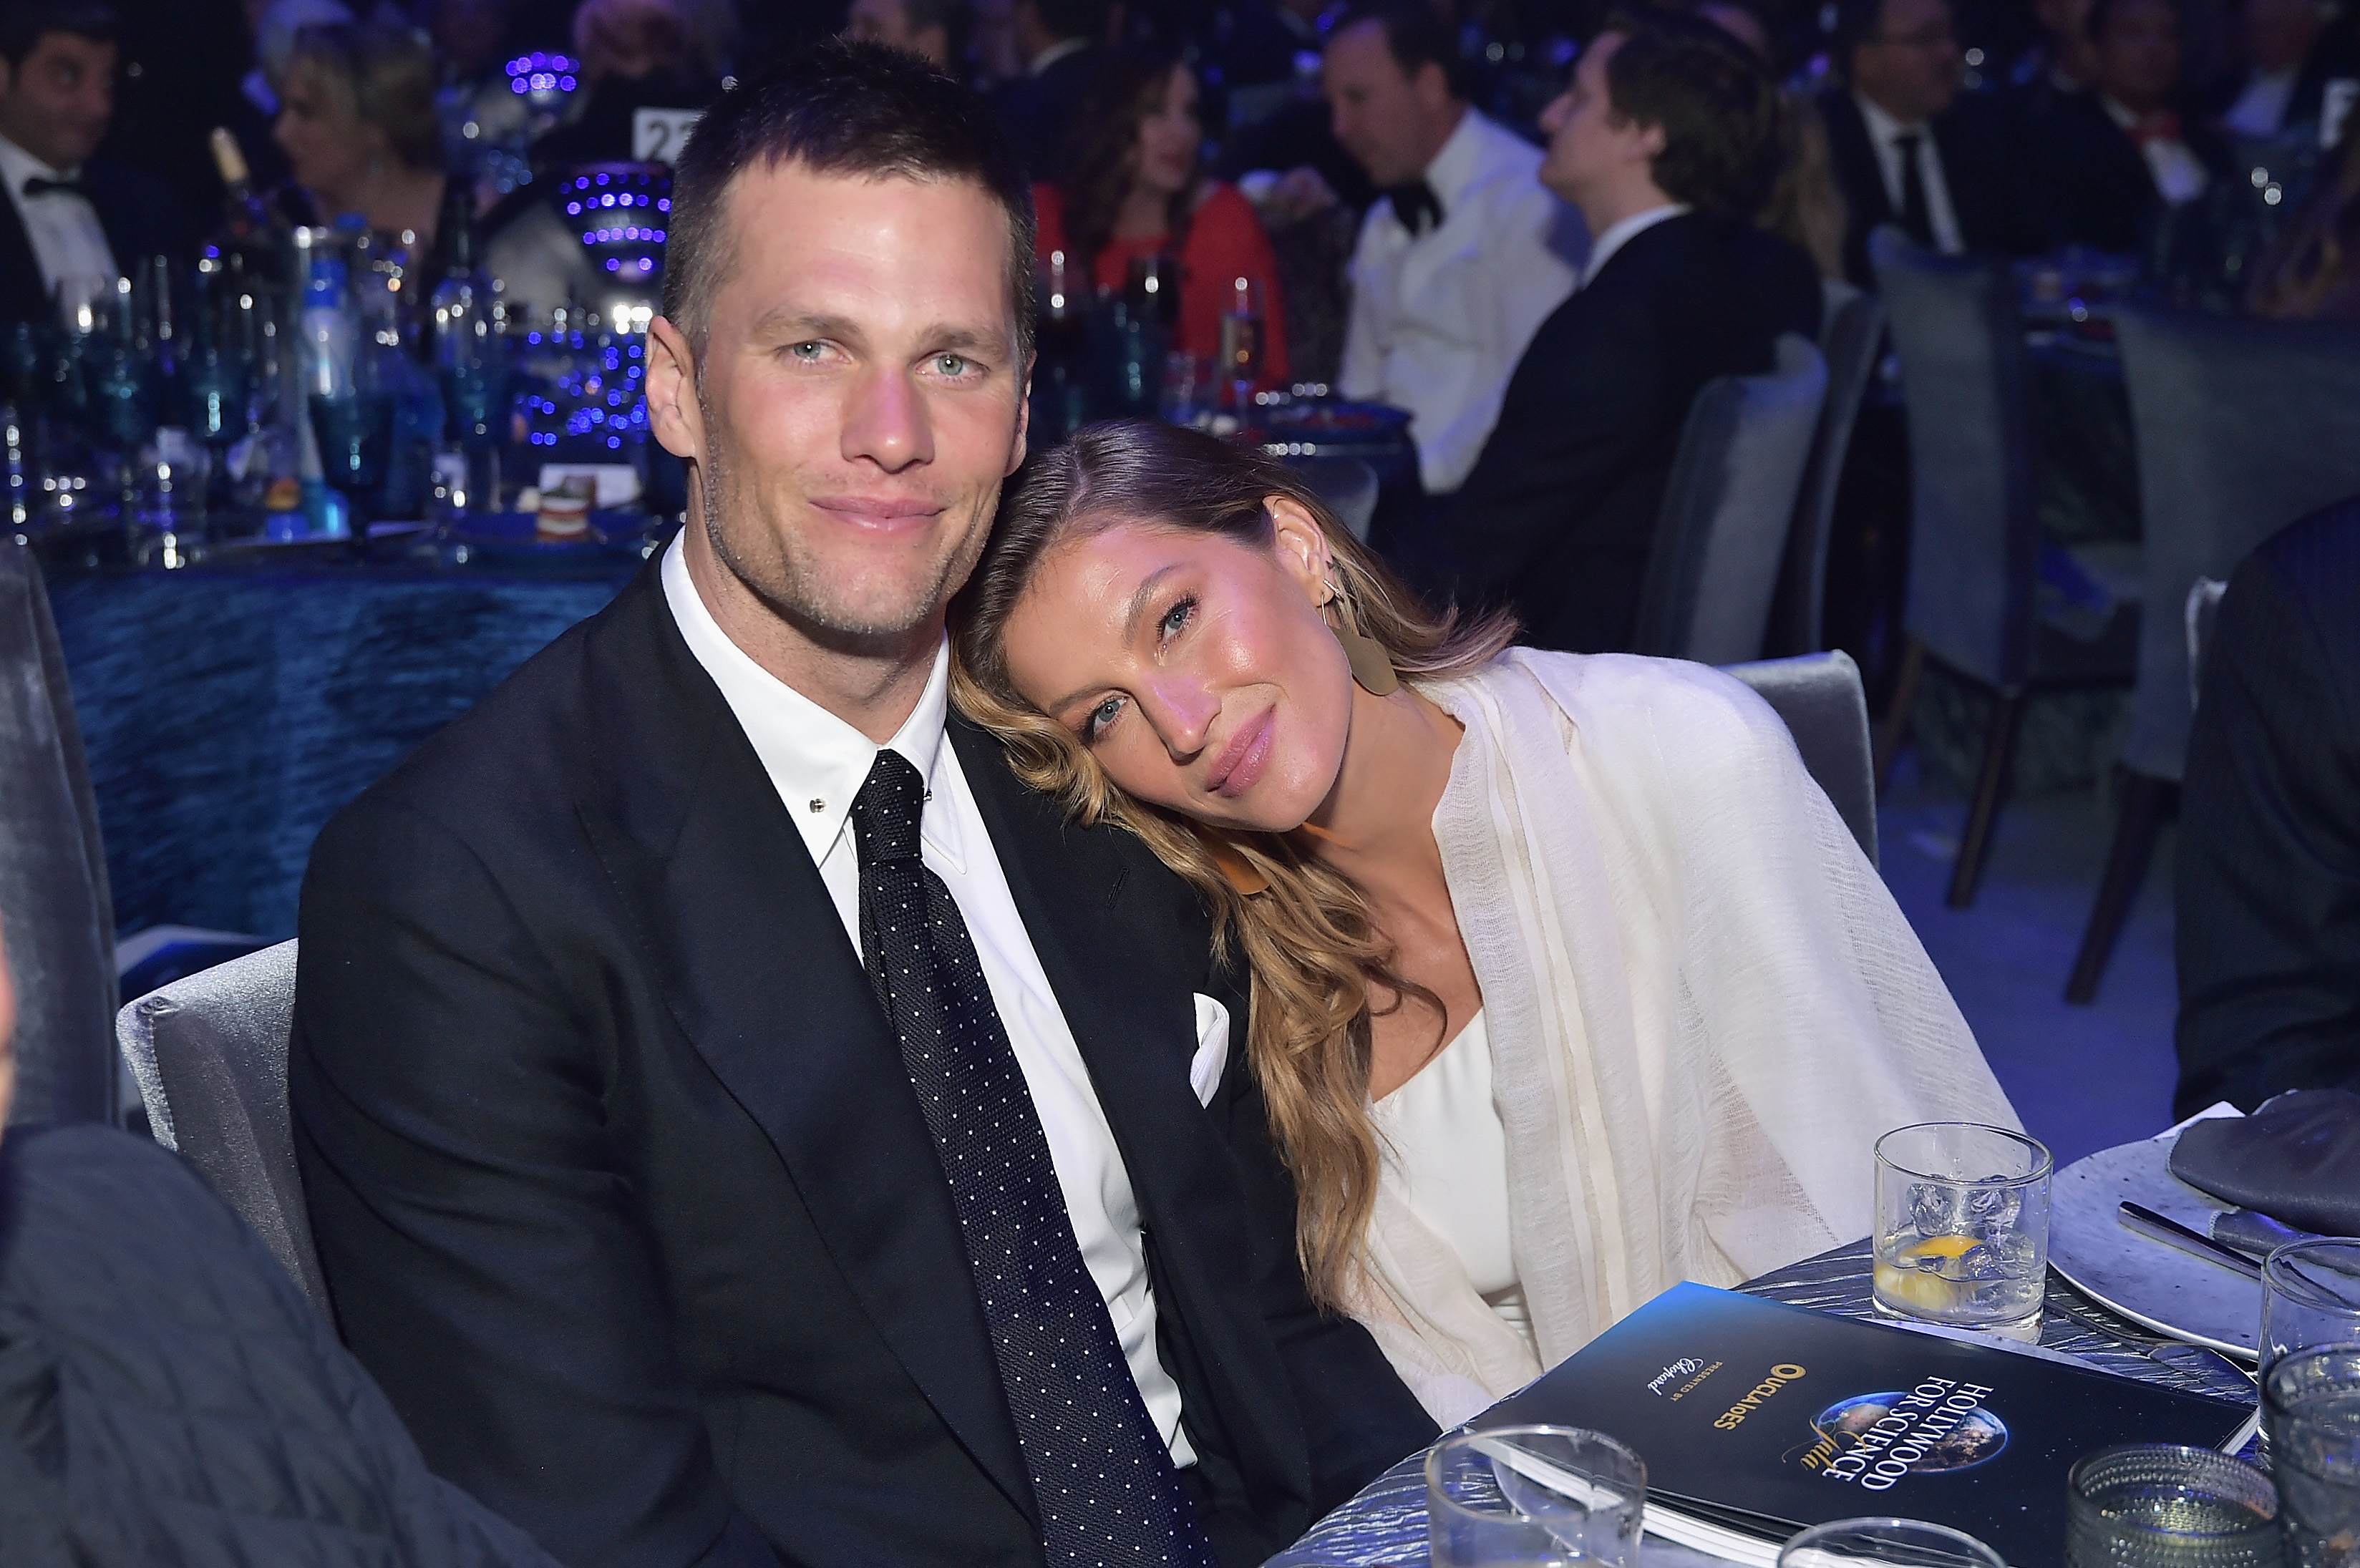 Brady and his ex-wife Gisele Bundchen divorced in October 2022 after 13 years of marriage